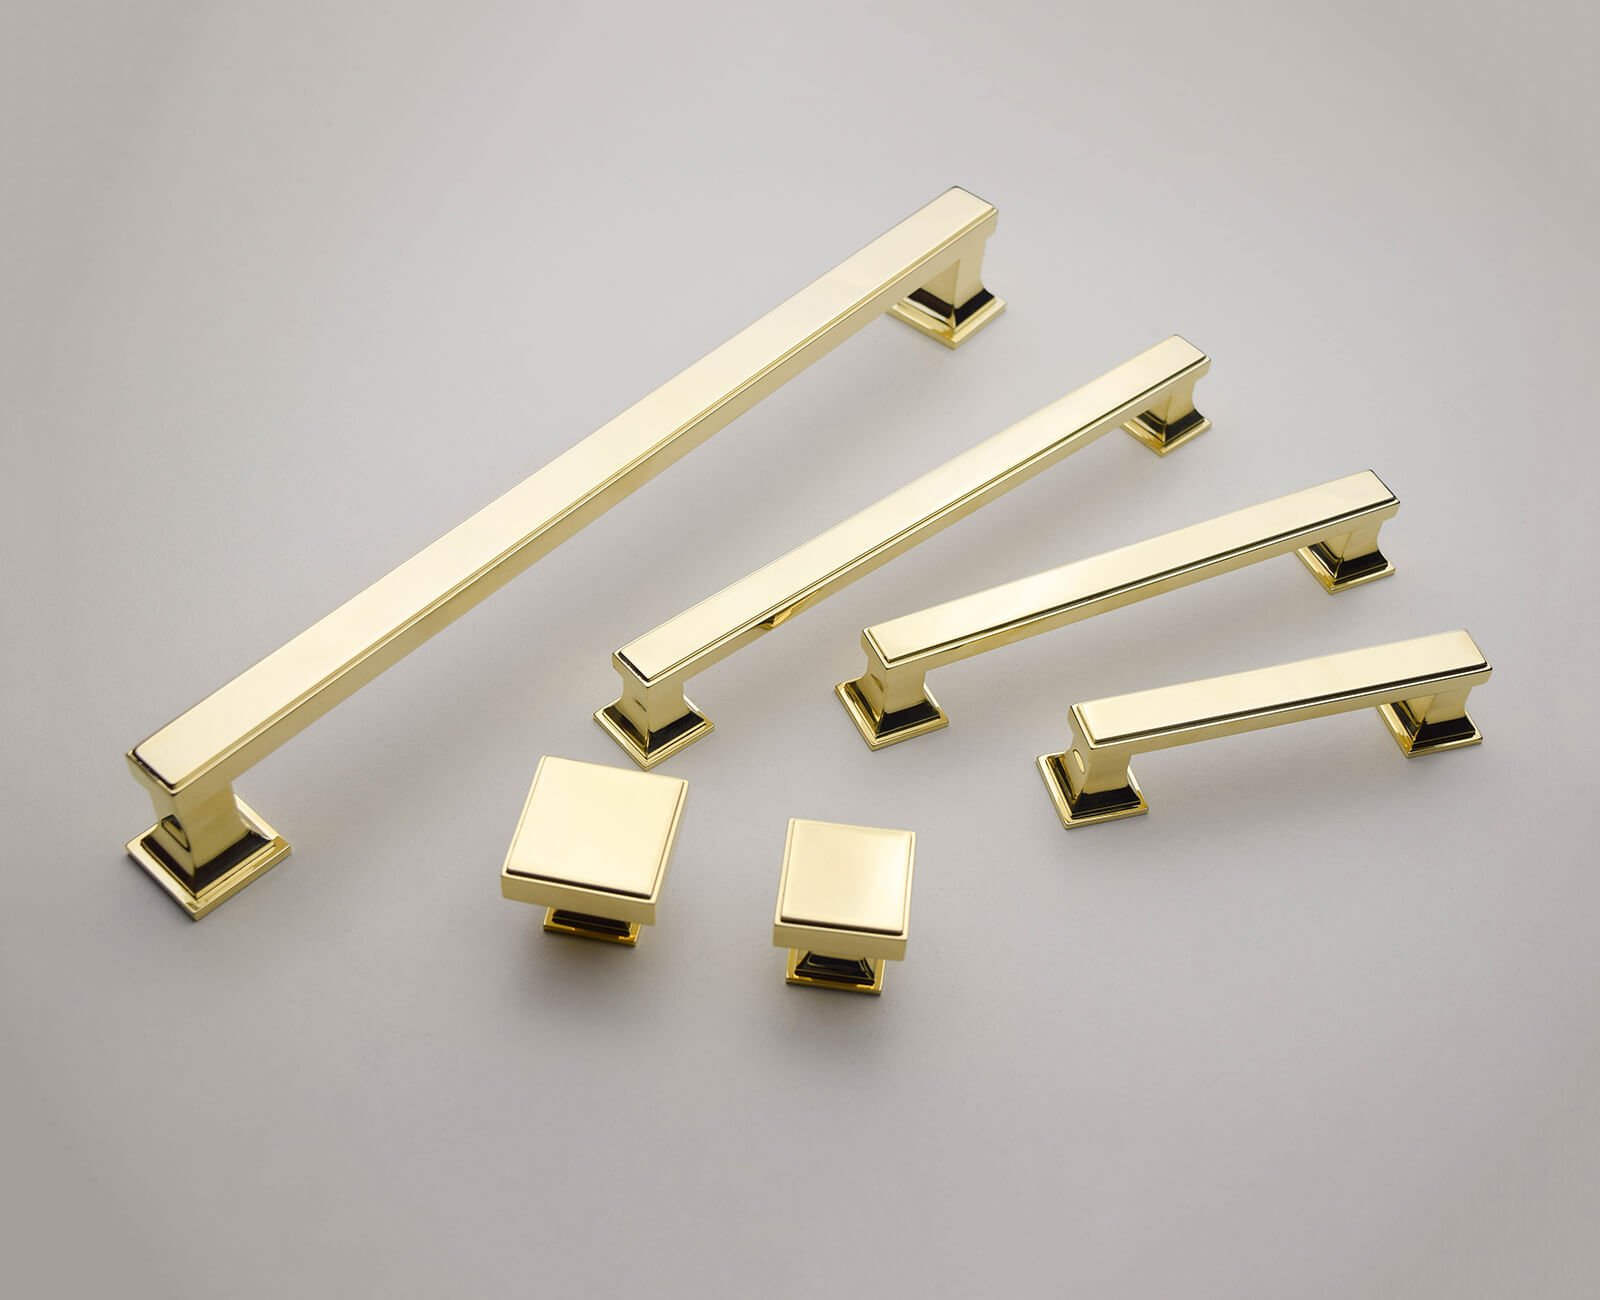 Solid brass cabinet pulls